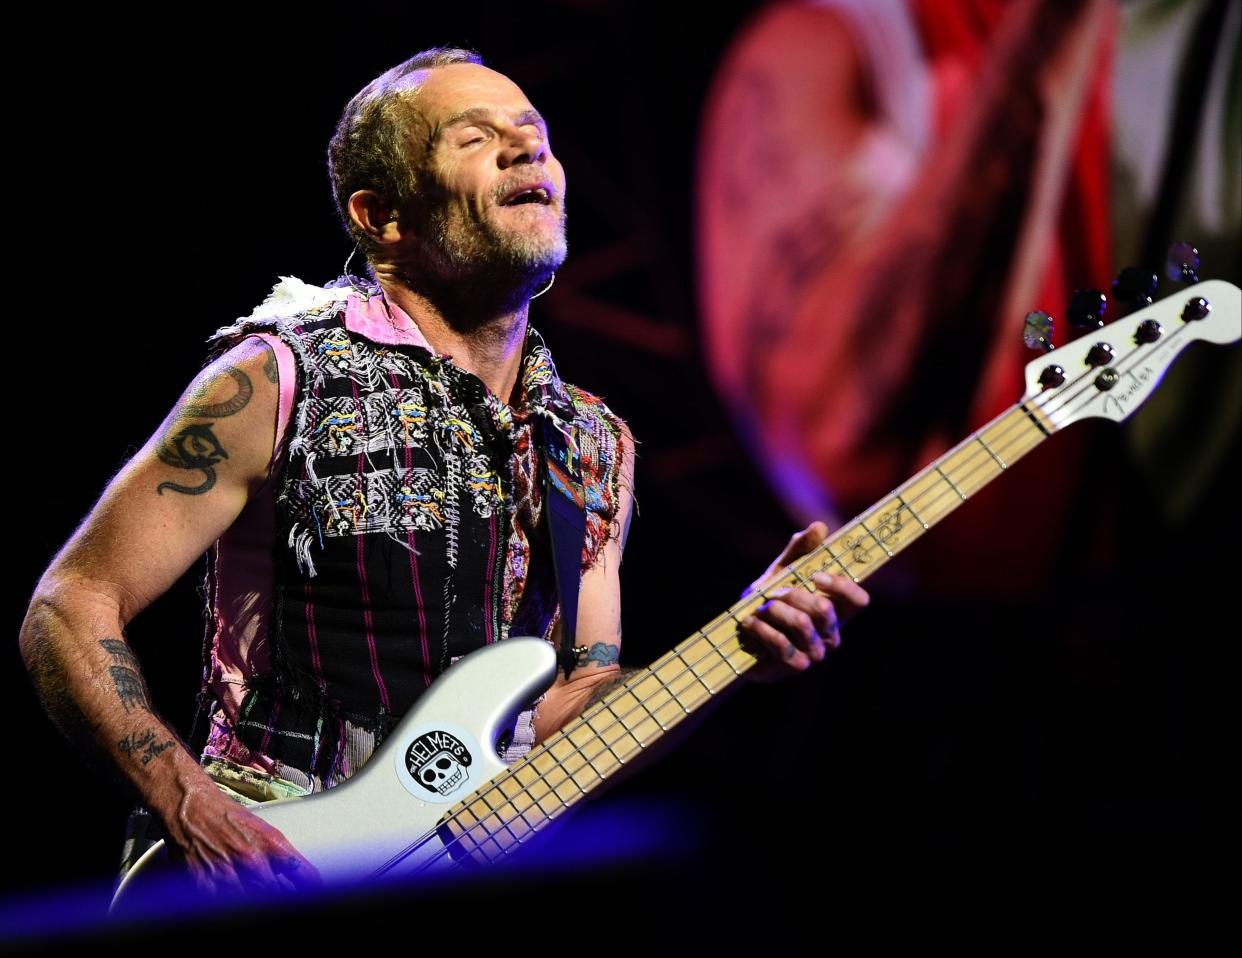 Red Hot Chili Peppers Flea performs at the Bonnaroo Music and Arts Festival in Manchester, Tenn, June 10, 2017.